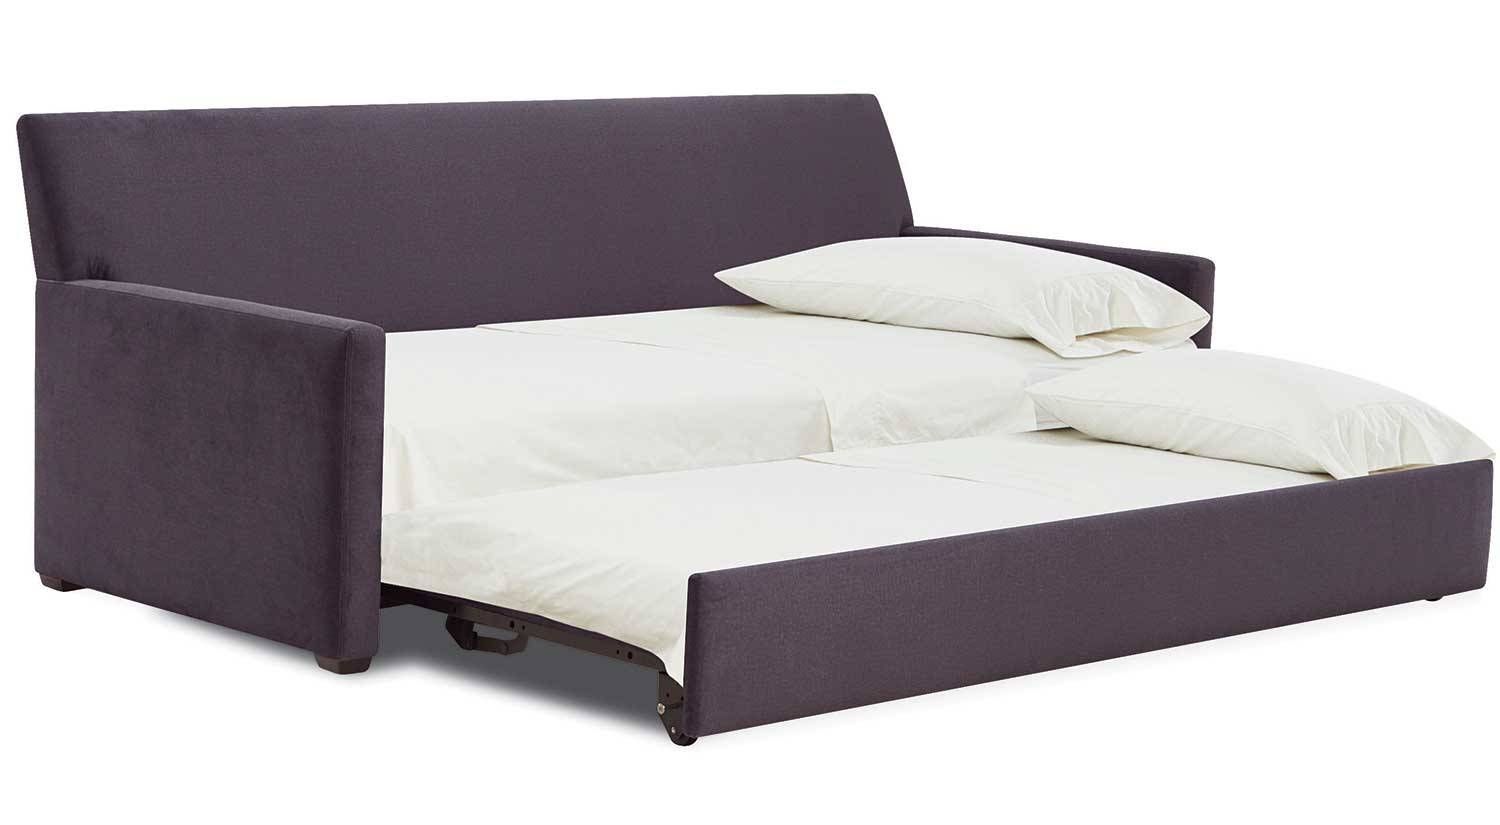 Circle Furniture – Austin Sleeper | Converitable Beds | Sofa Beds Pertaining To Austin Sleeper Sofas (View 1 of 15)